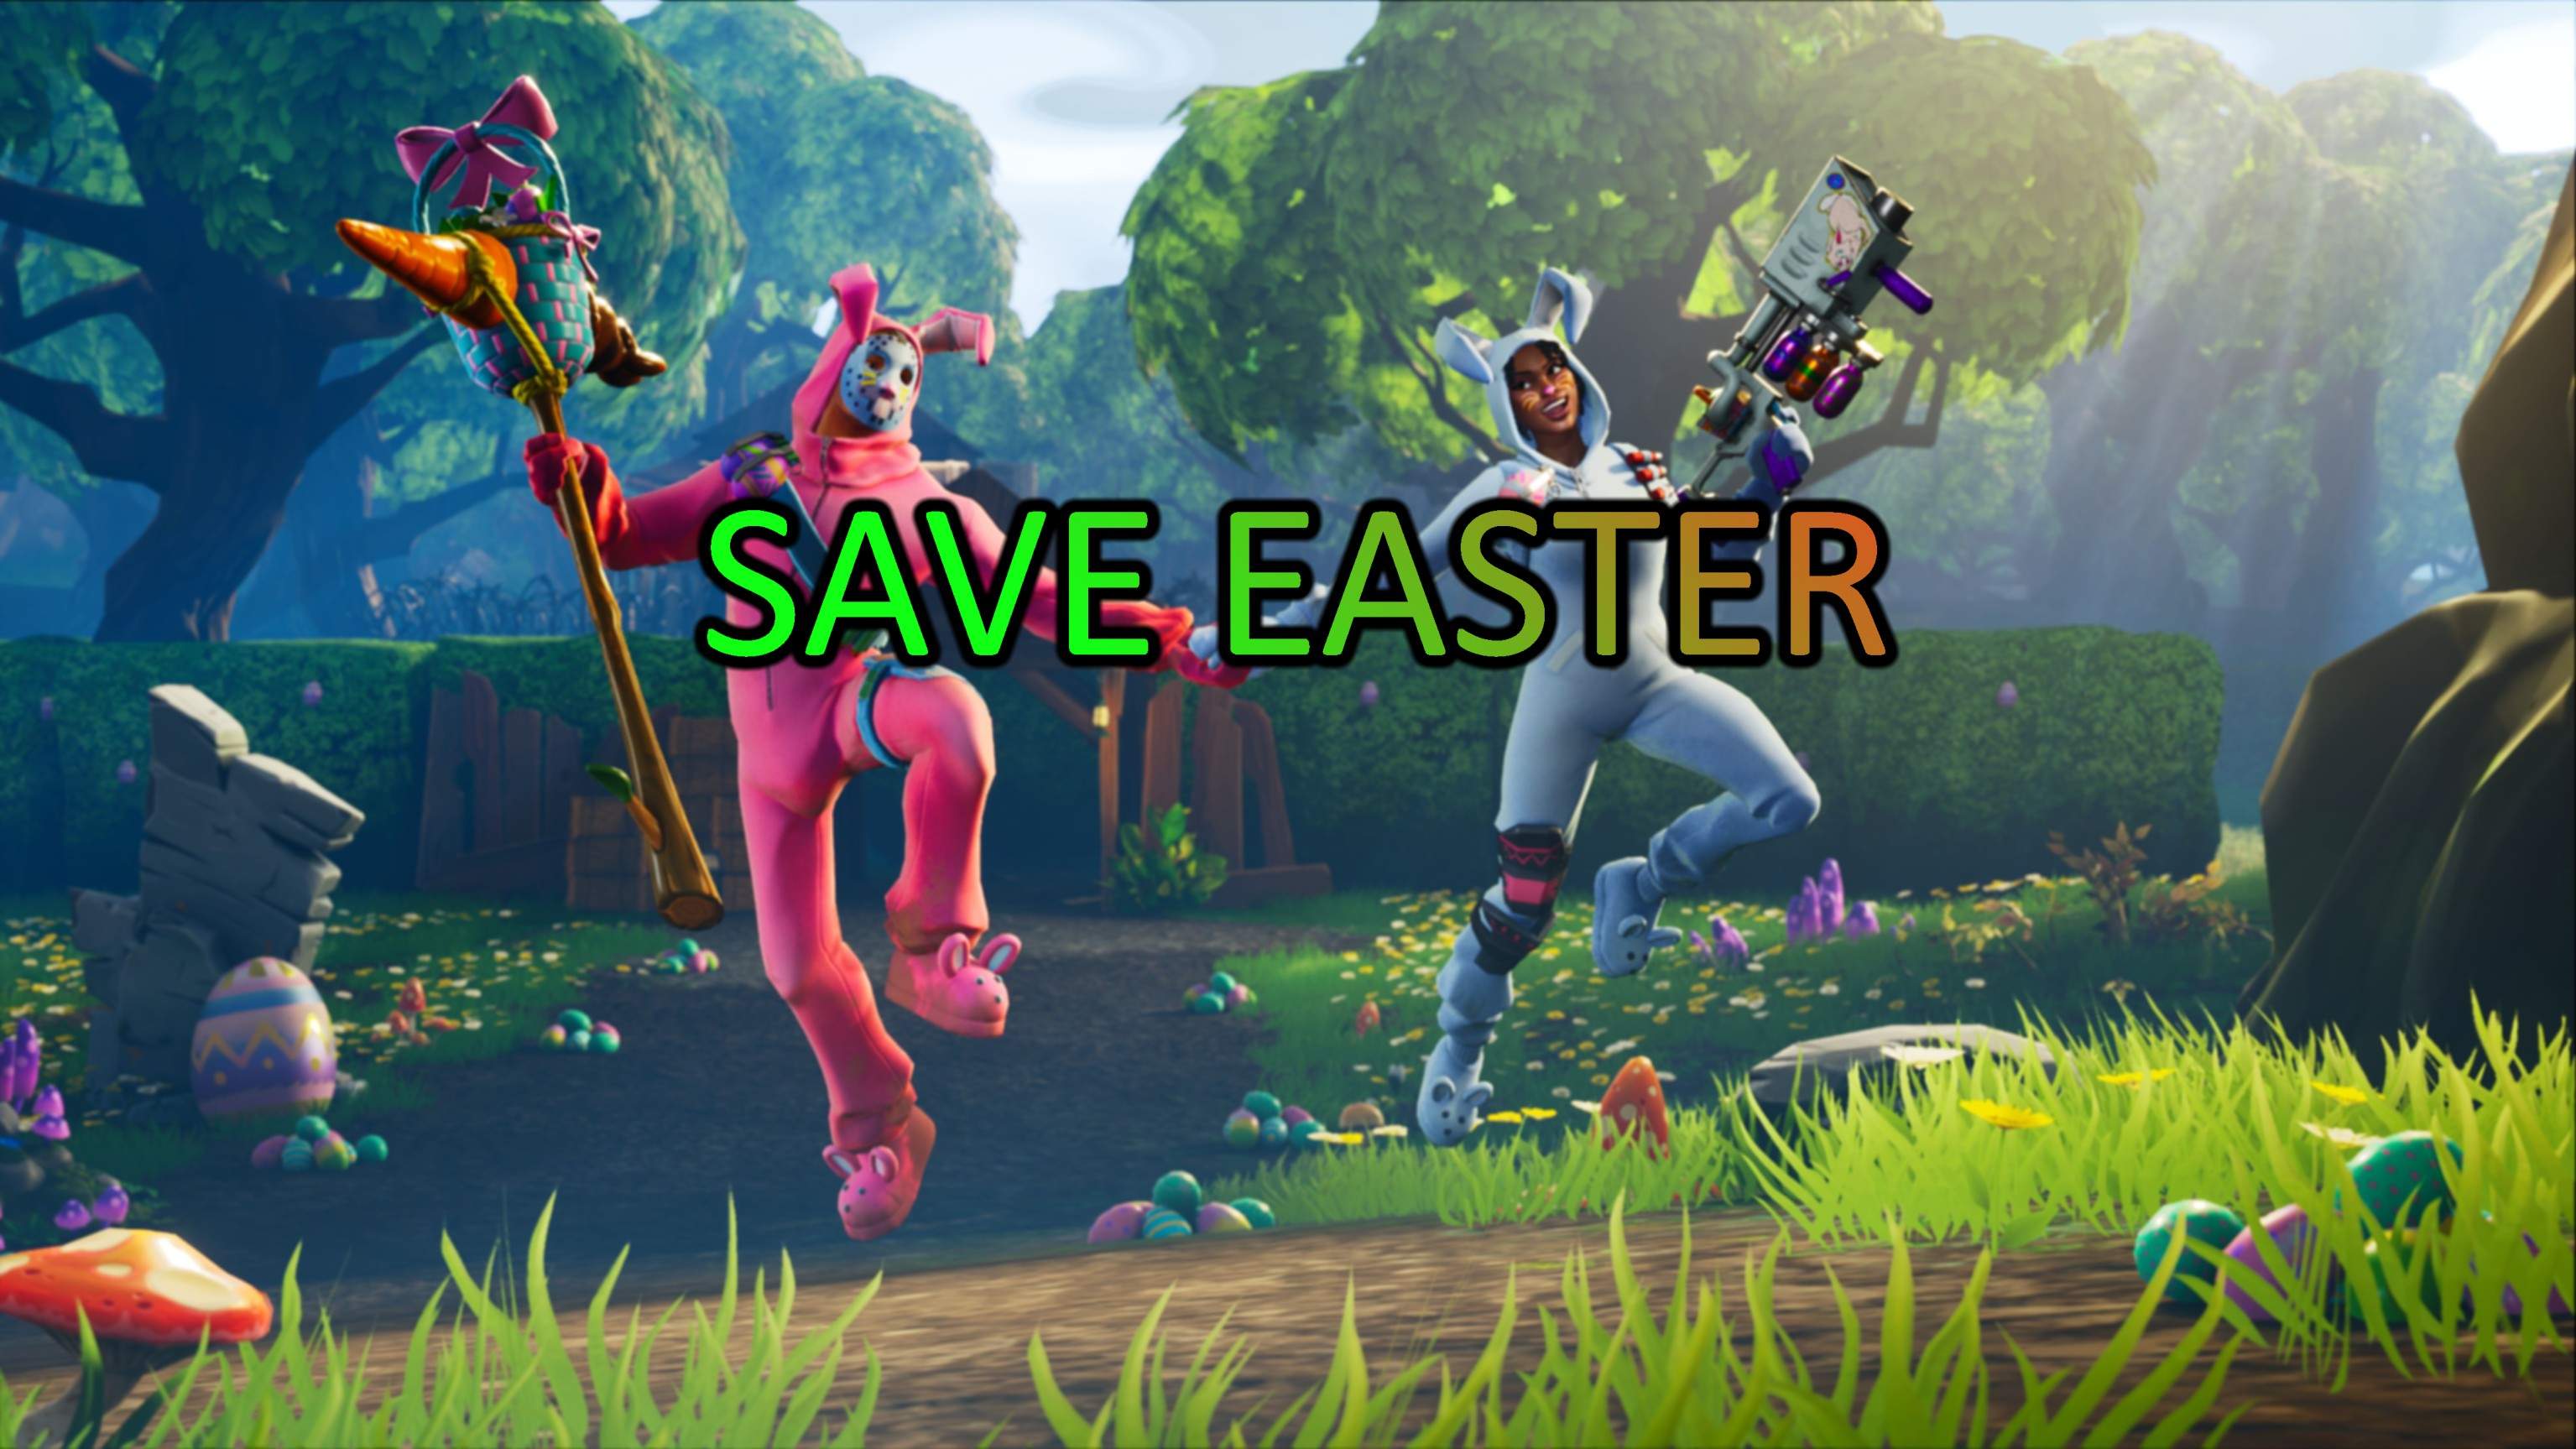 SAVE EASTER